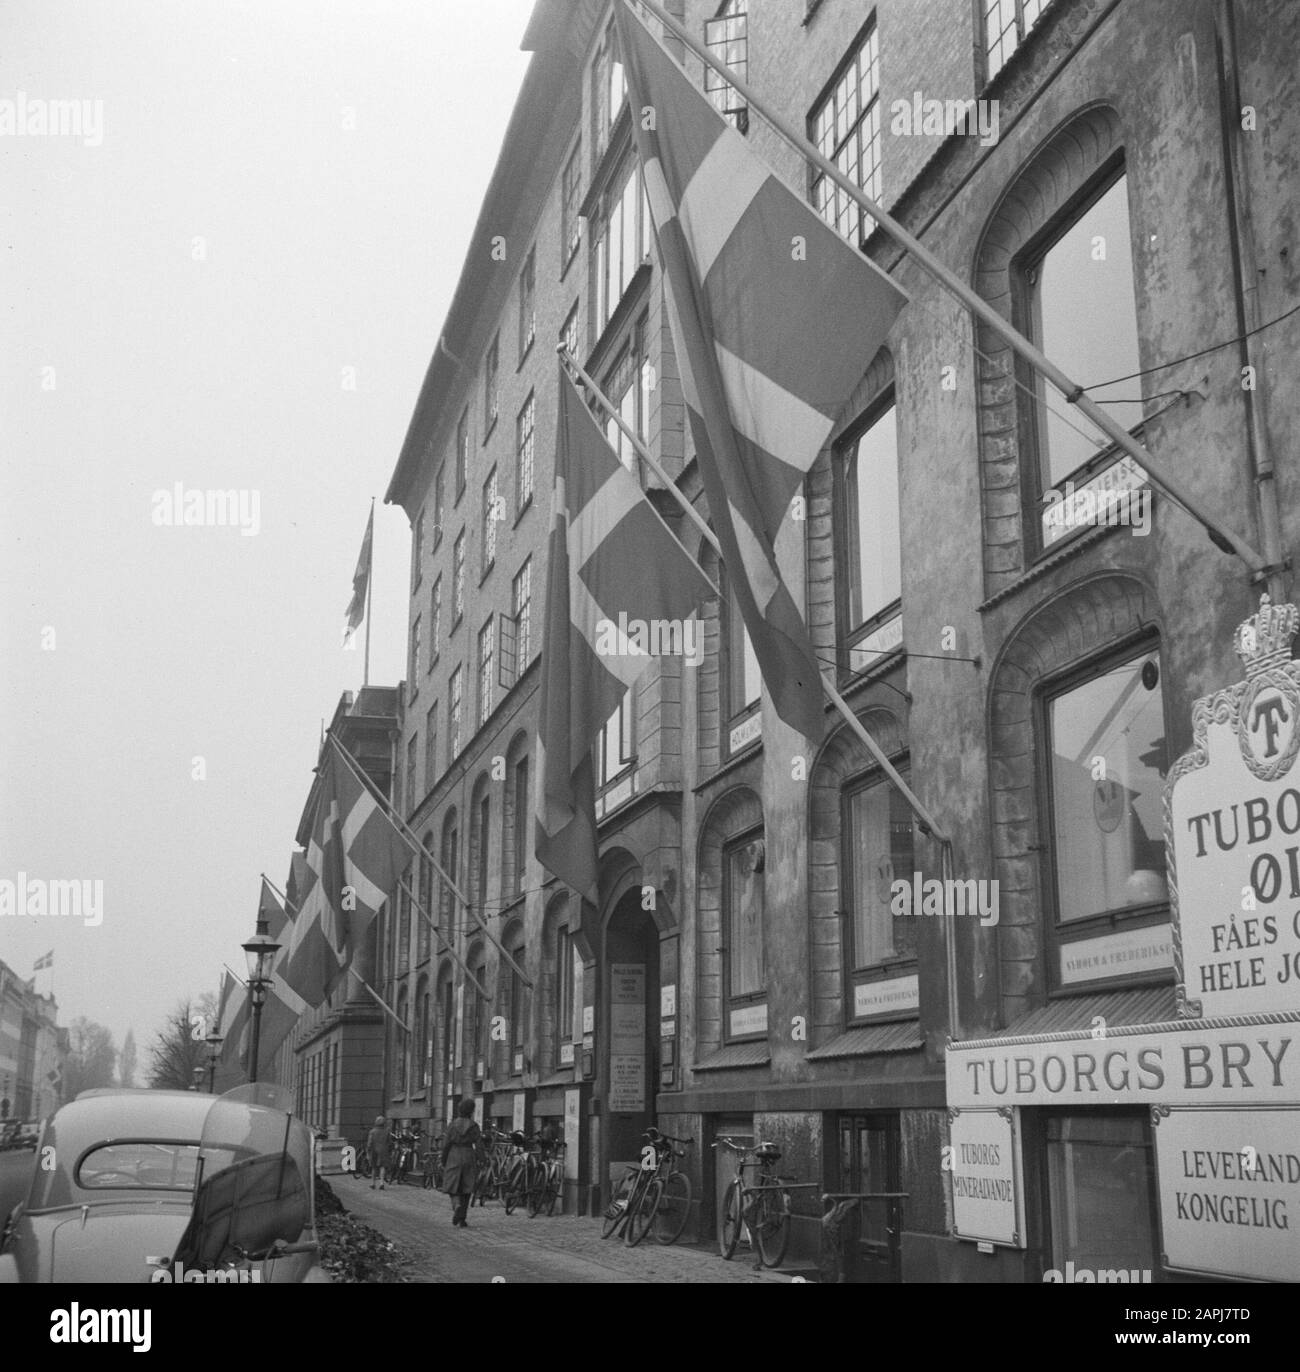 55th anniversary of King Frederick IX Description: Danish flags at the Tuborg Brewery in honor of the King's birthday Date: March 11, 1954 Location: Denmark, Copenhagen Keywords: Cars, breweries, bicycles, street images, birthdays, flags Stock Photo